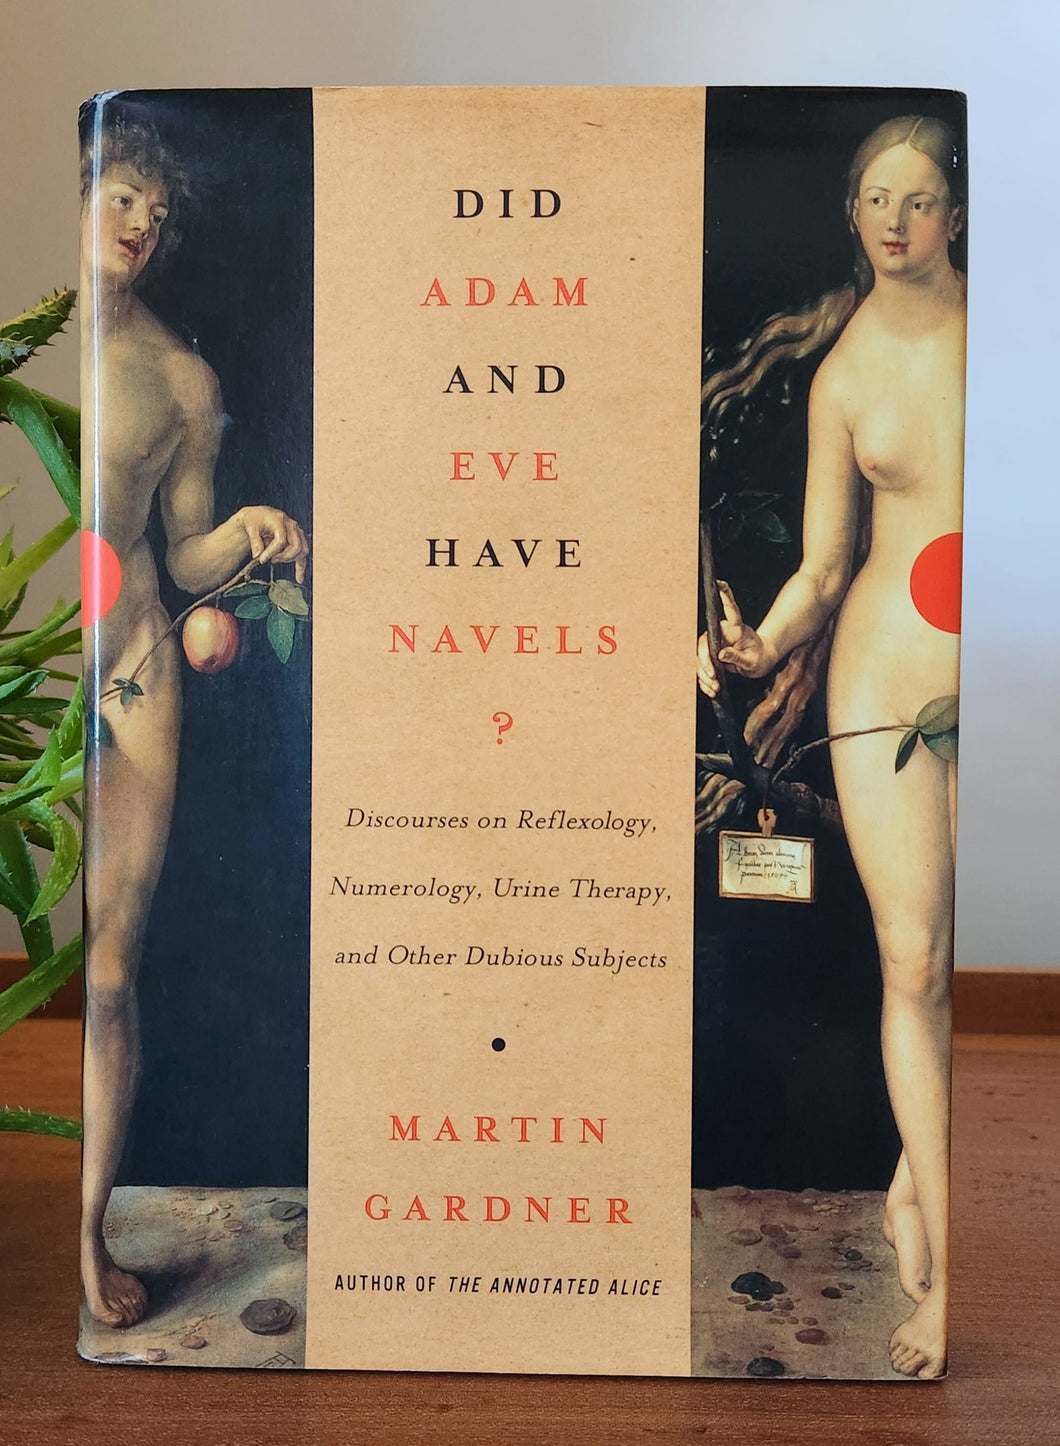 Did Adam and Eve Have Navels? by Martin Gardner